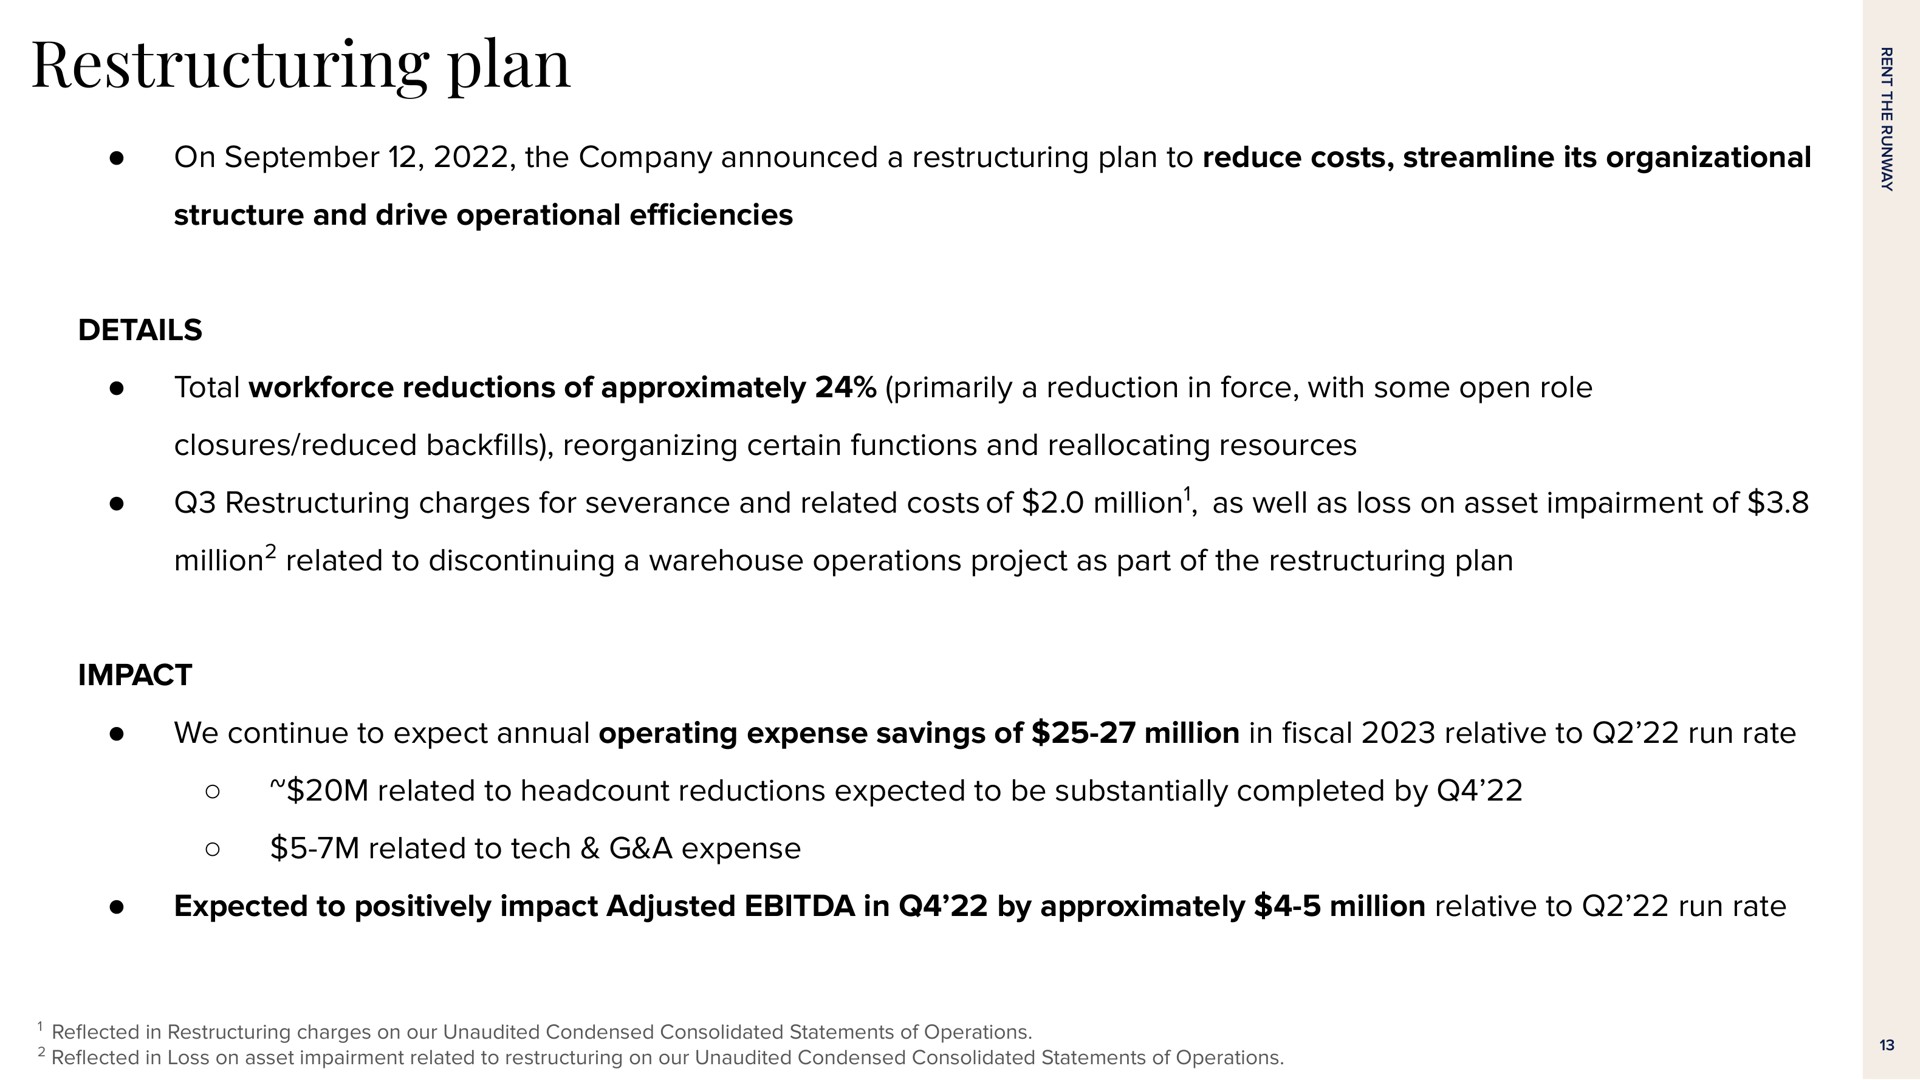 plan on the company announced a plan to reduce costs streamline its organizational structure and drive operational details total reductions of approximately primarily a reduction in force with some open role closures reduced back reorganizing certain functions and reallocating resources charges for severance and related costs of million as well as loss on asset impairment of million related to discontinuing a warehouse operations project as part of the plan impact we continue to expect annual operating expense savings of million in relative to run rate related to reductions expected to be substantially completed by related to tech a expense expected to positively impact adjusted in by approximately million relative to run rate | Rent The Runway